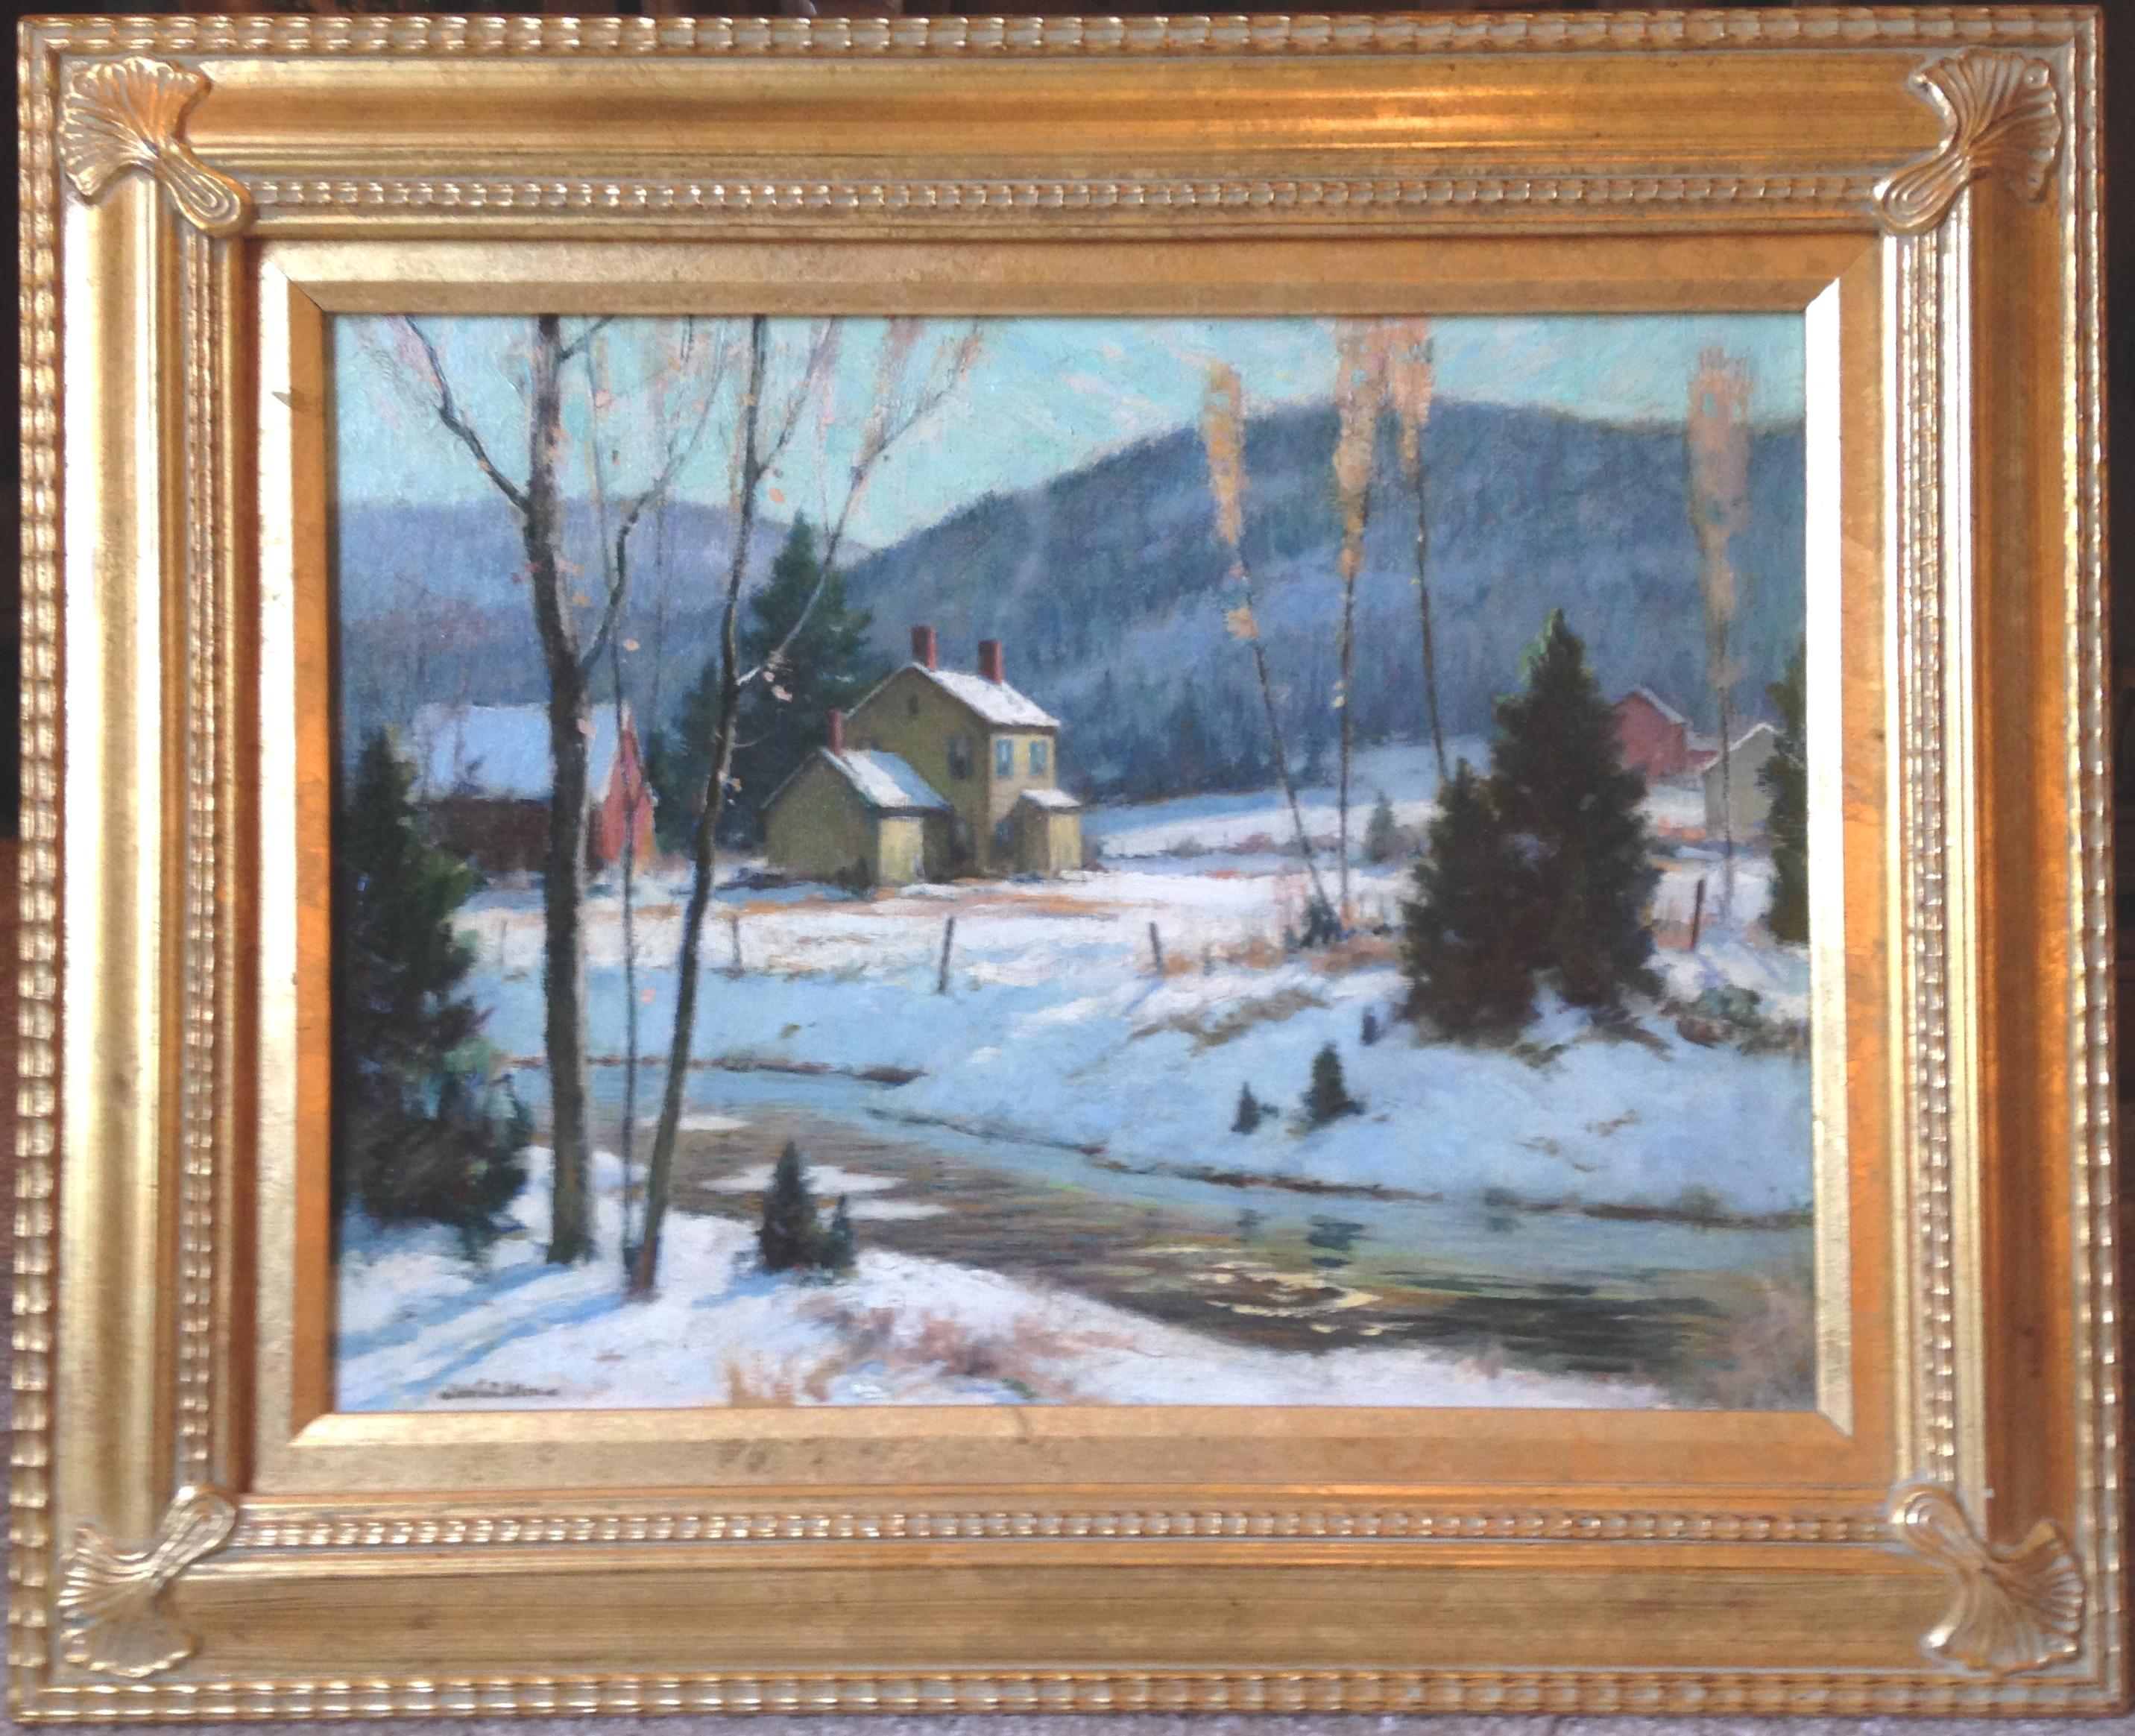 Winter Afternoon  oil on canvas panel image is 12 x 16
Painting has been cleaned by PA Conservatory.
Junius Allen, N.A. ( 1898-1962) was considered one of the most promising artists of the twentieth century for his naturalistic and enticing